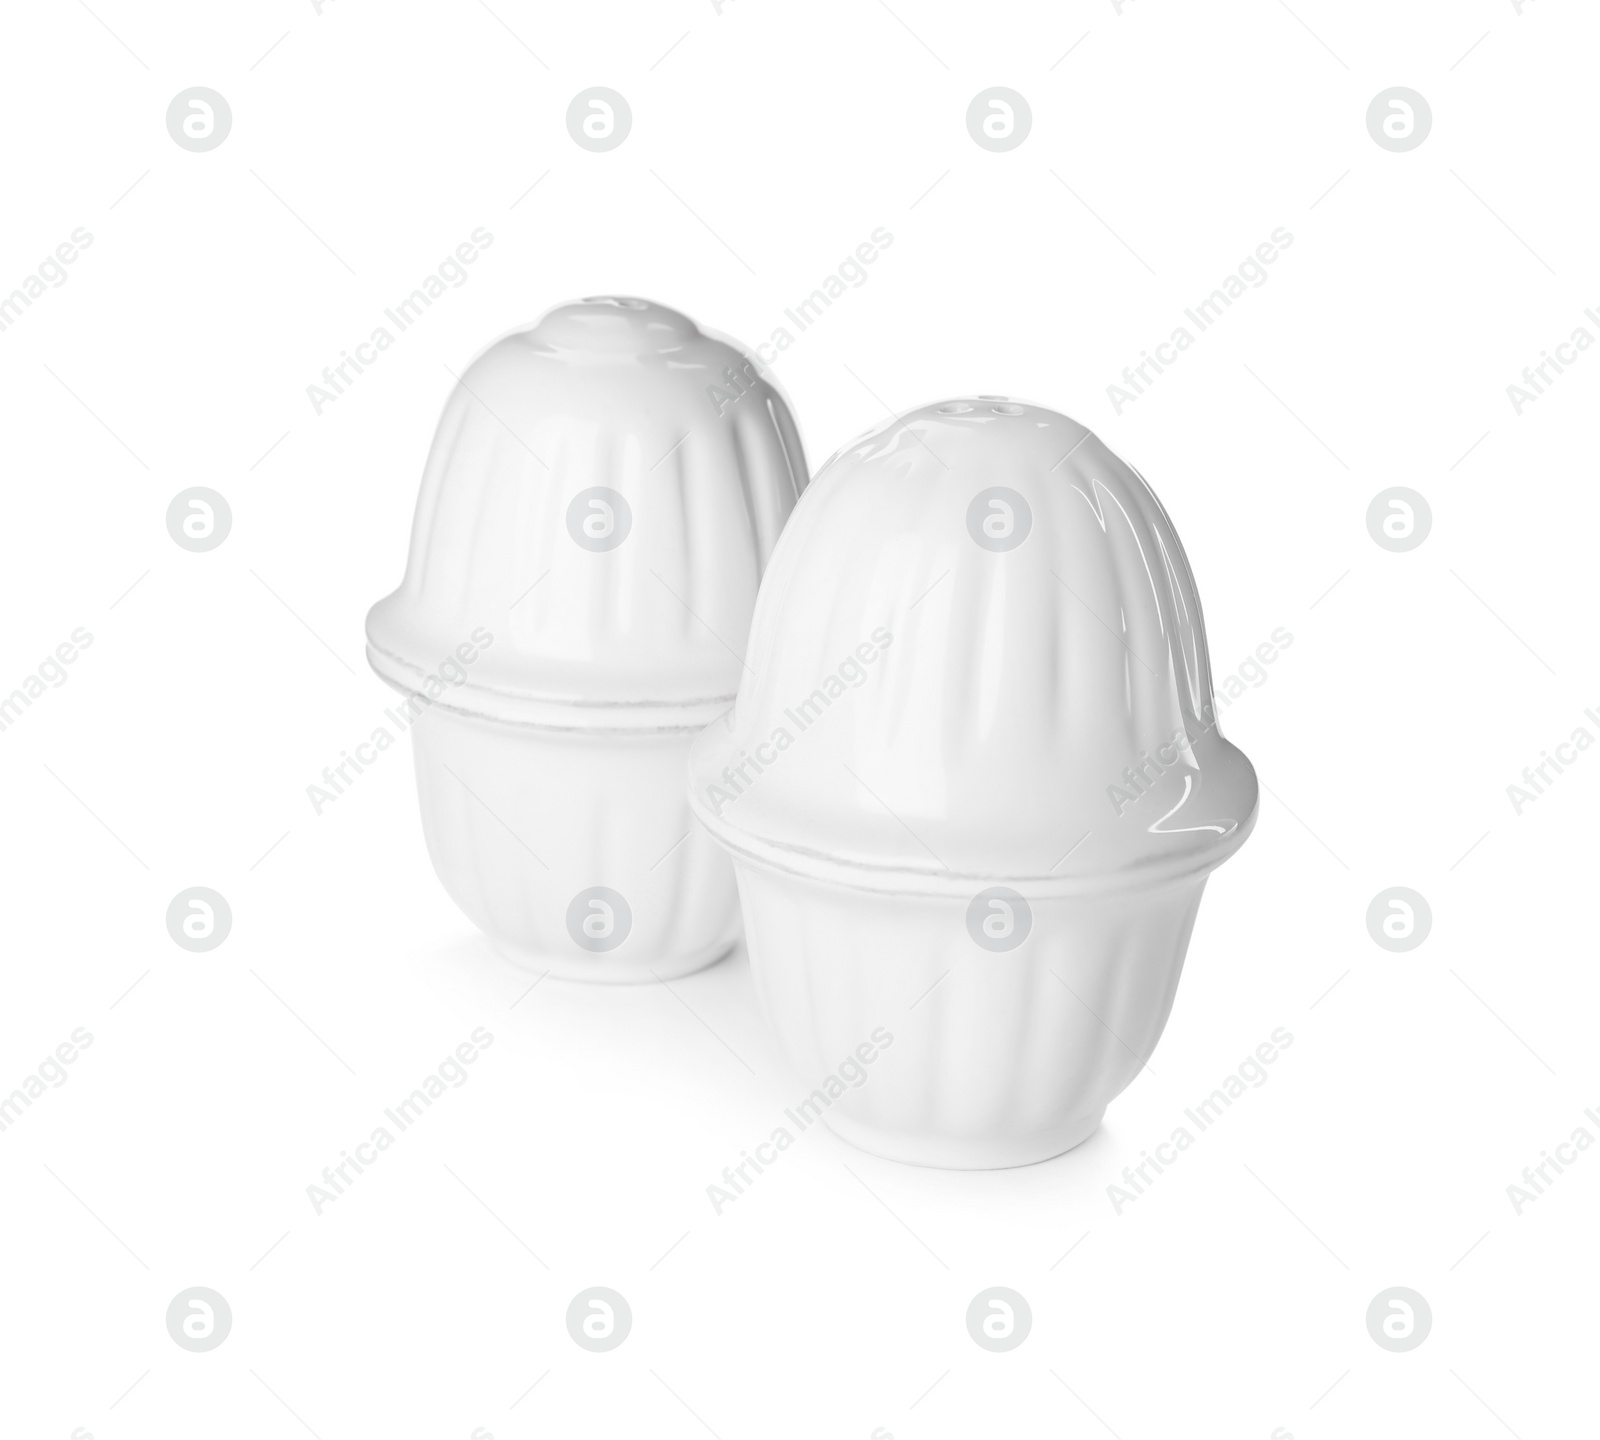 Photo of Ceramic egg cups with lids on white background